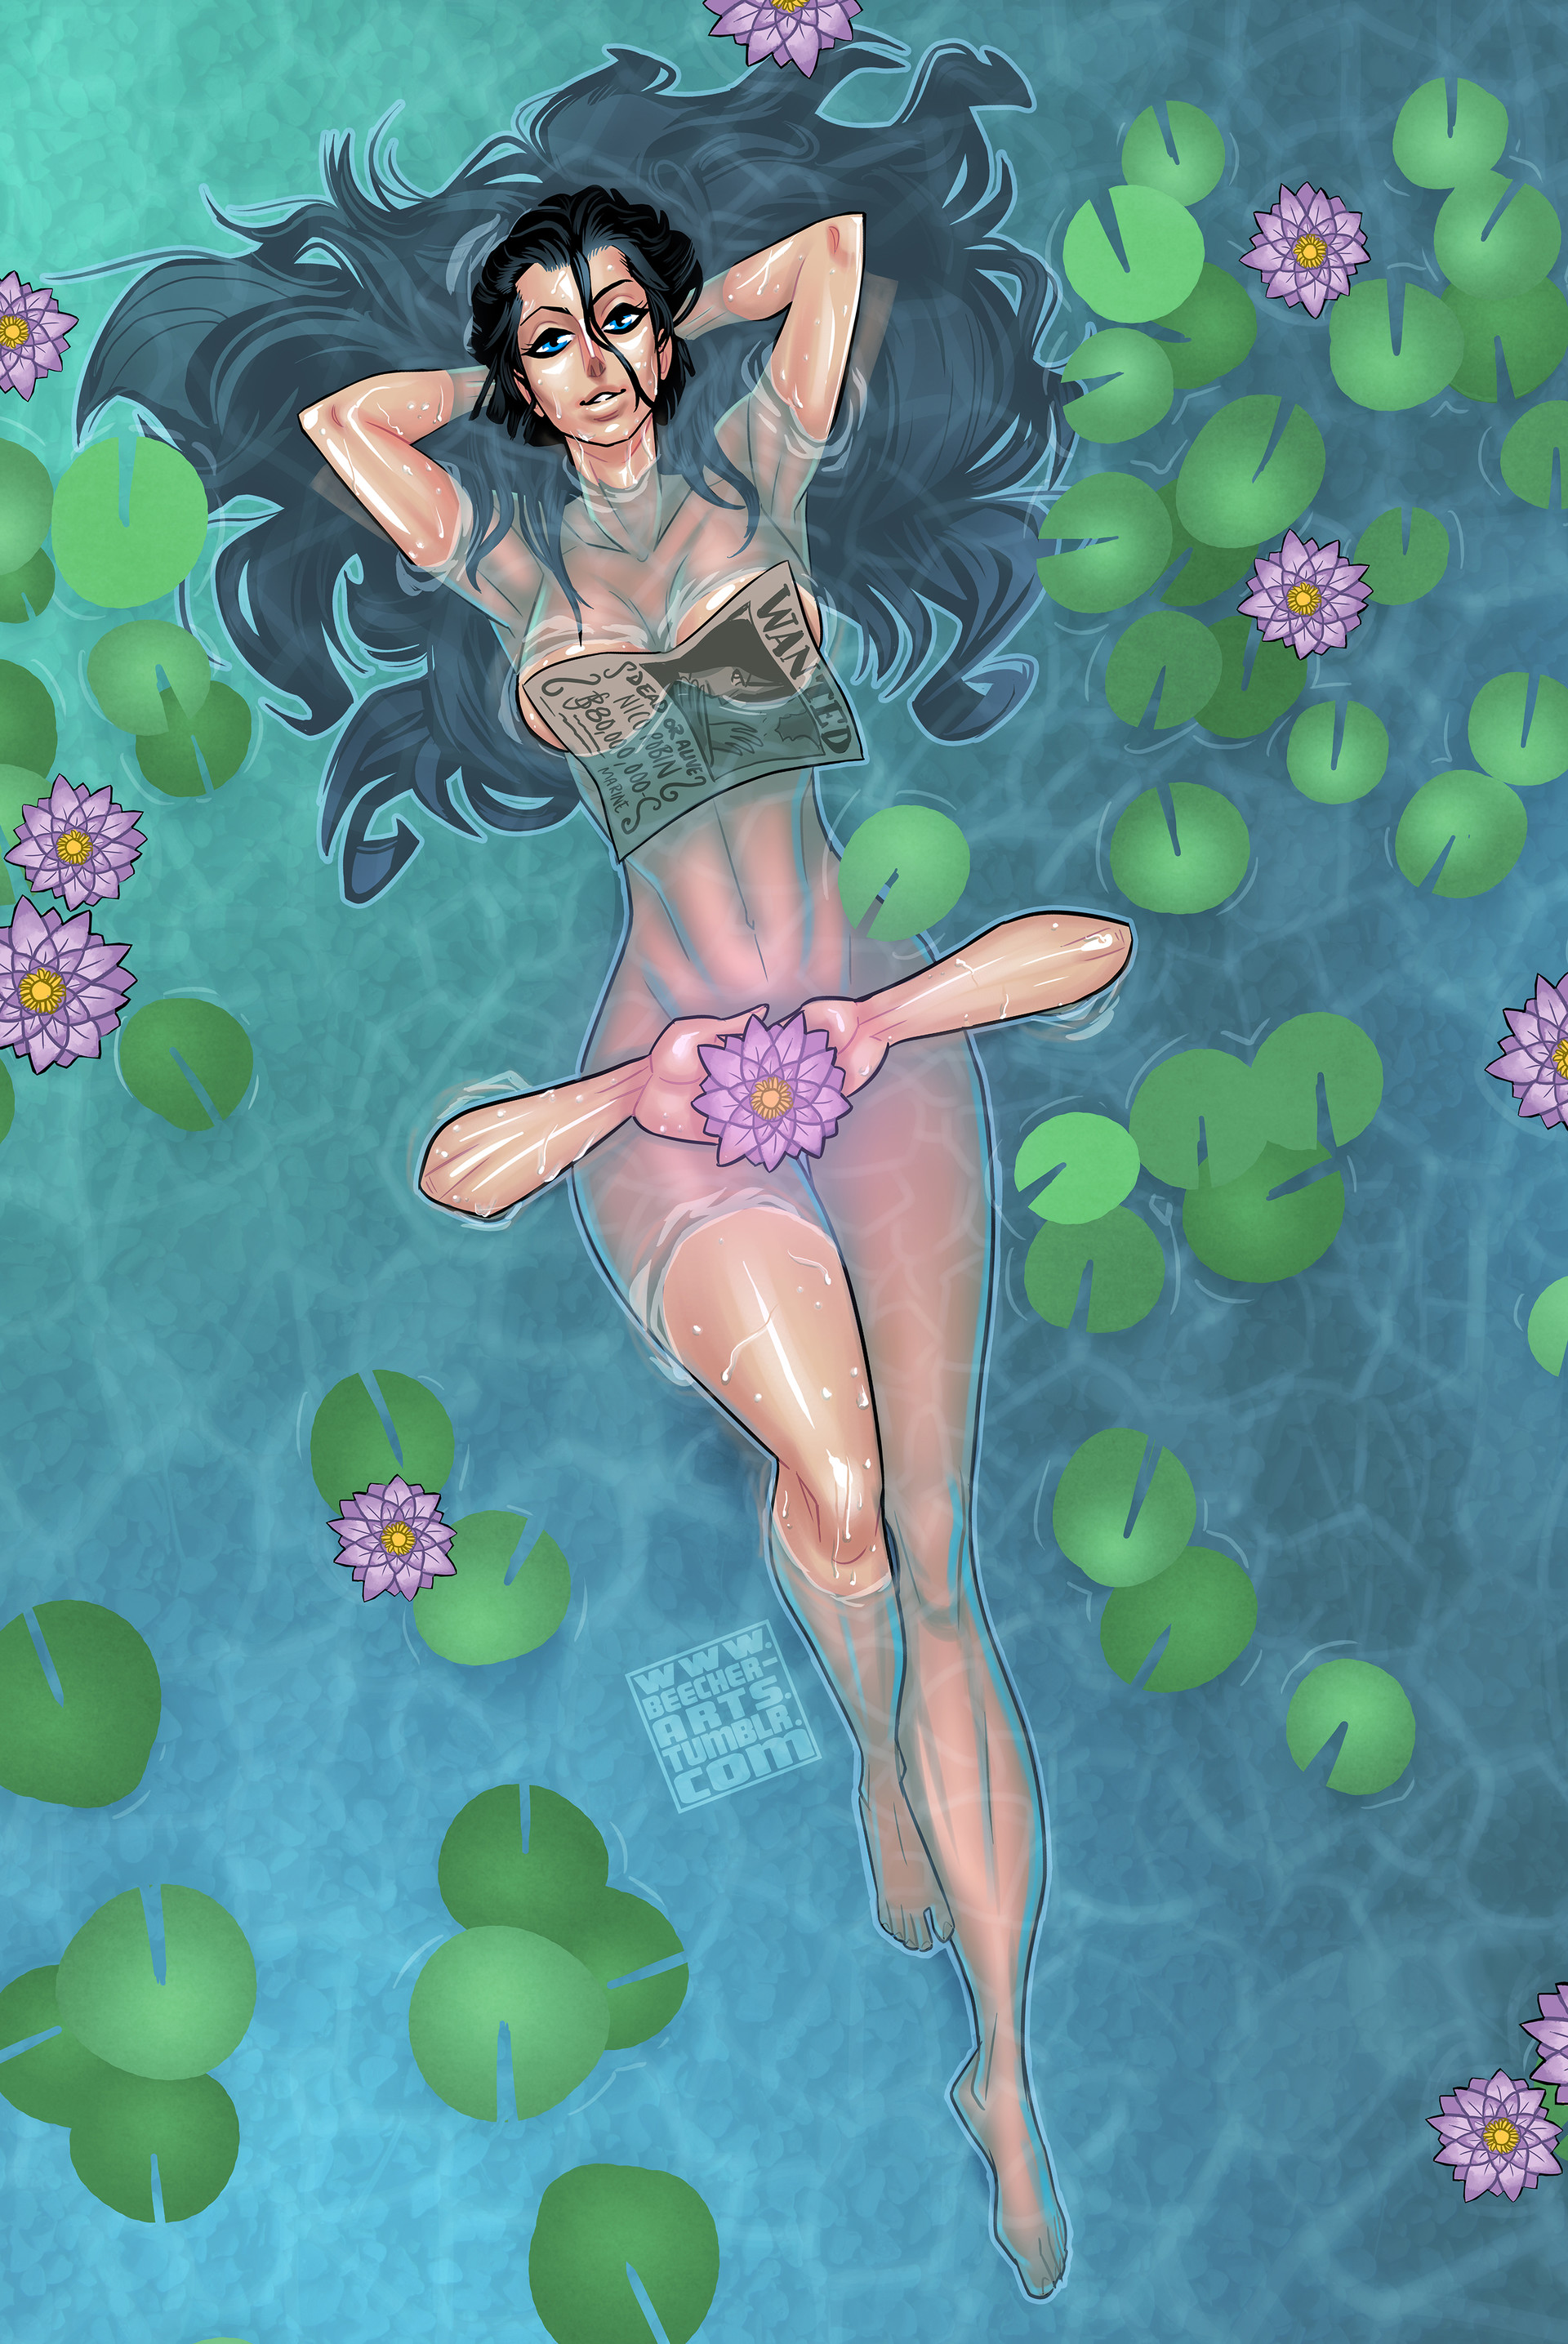 Commission for fanart of Nico Robin from One Piece.